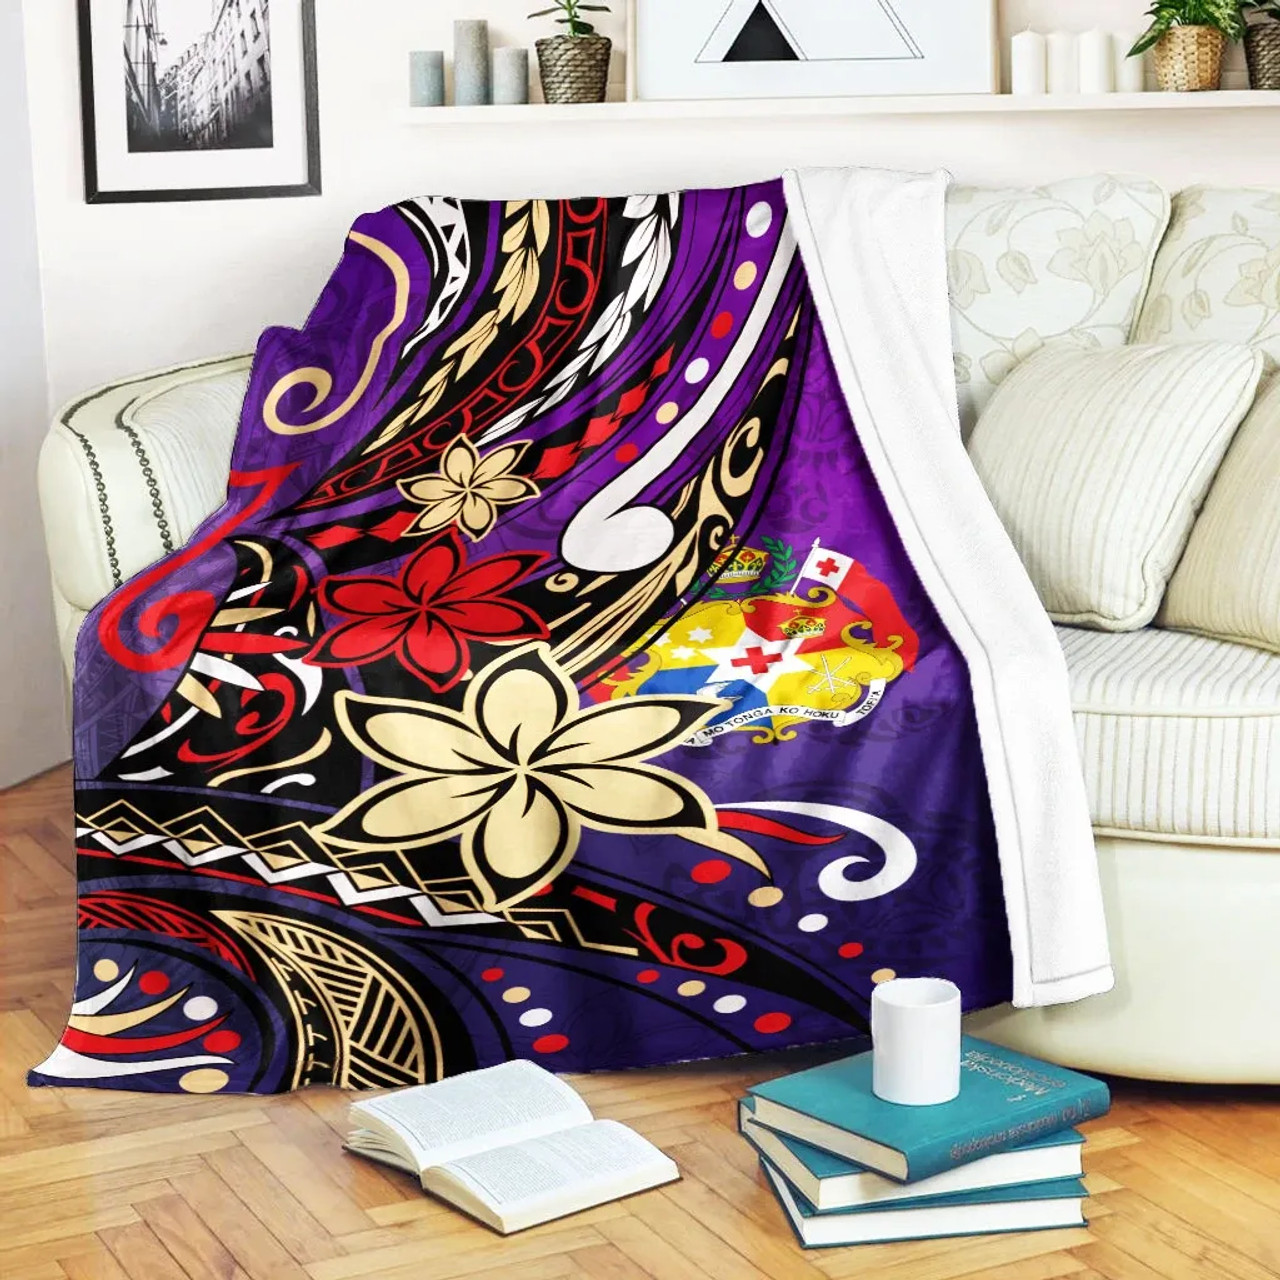 Tonga Premium Blanket - Tribal Flower With Special Turtles Purple Color 1